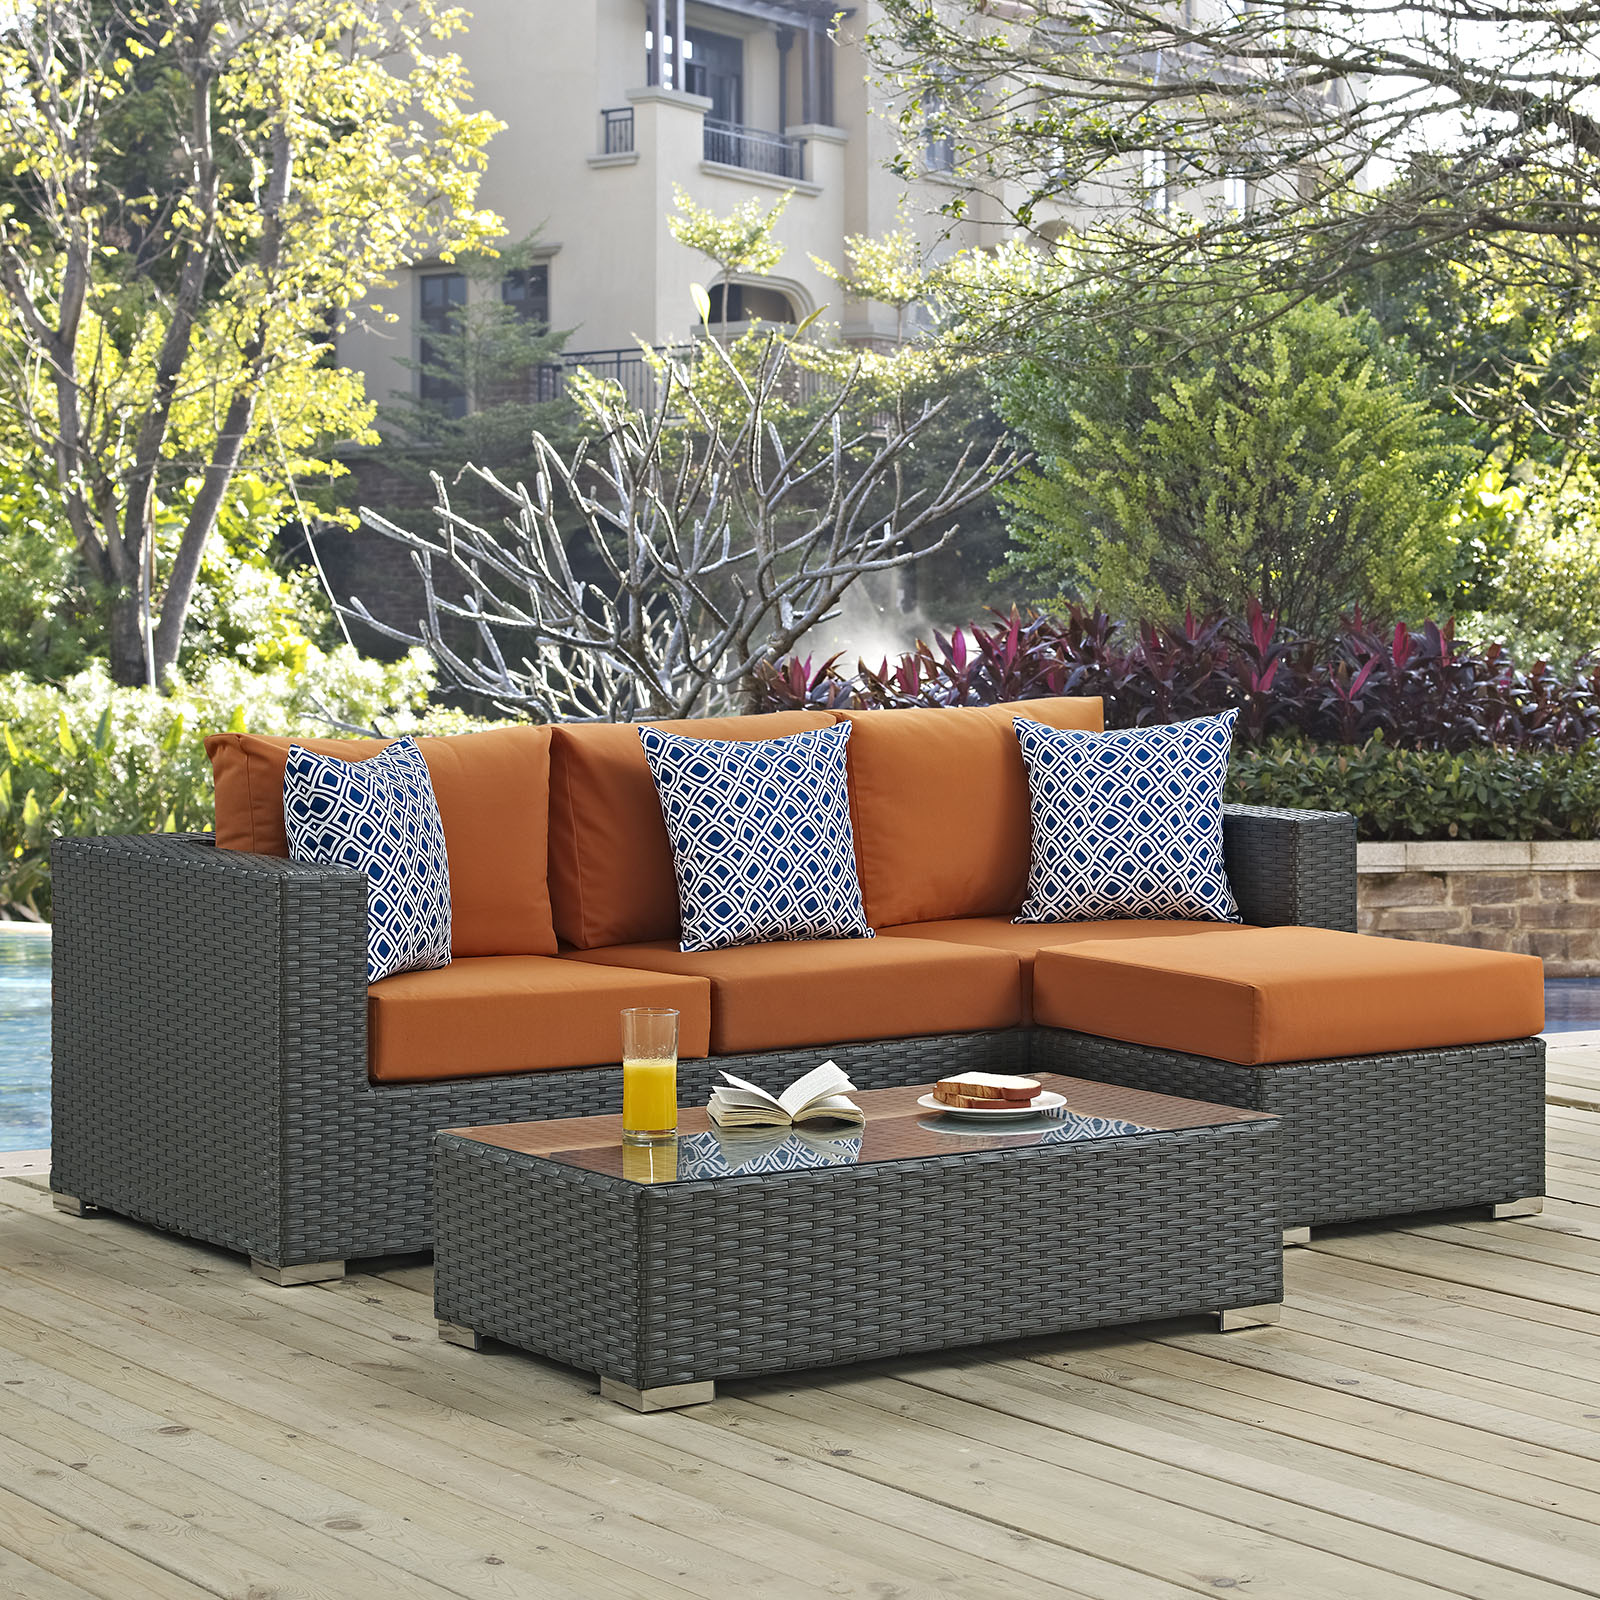 Modway Sojourn 3 Piece Outdoor Patio Sunbrella Sectional Set - Canvas Tuscan